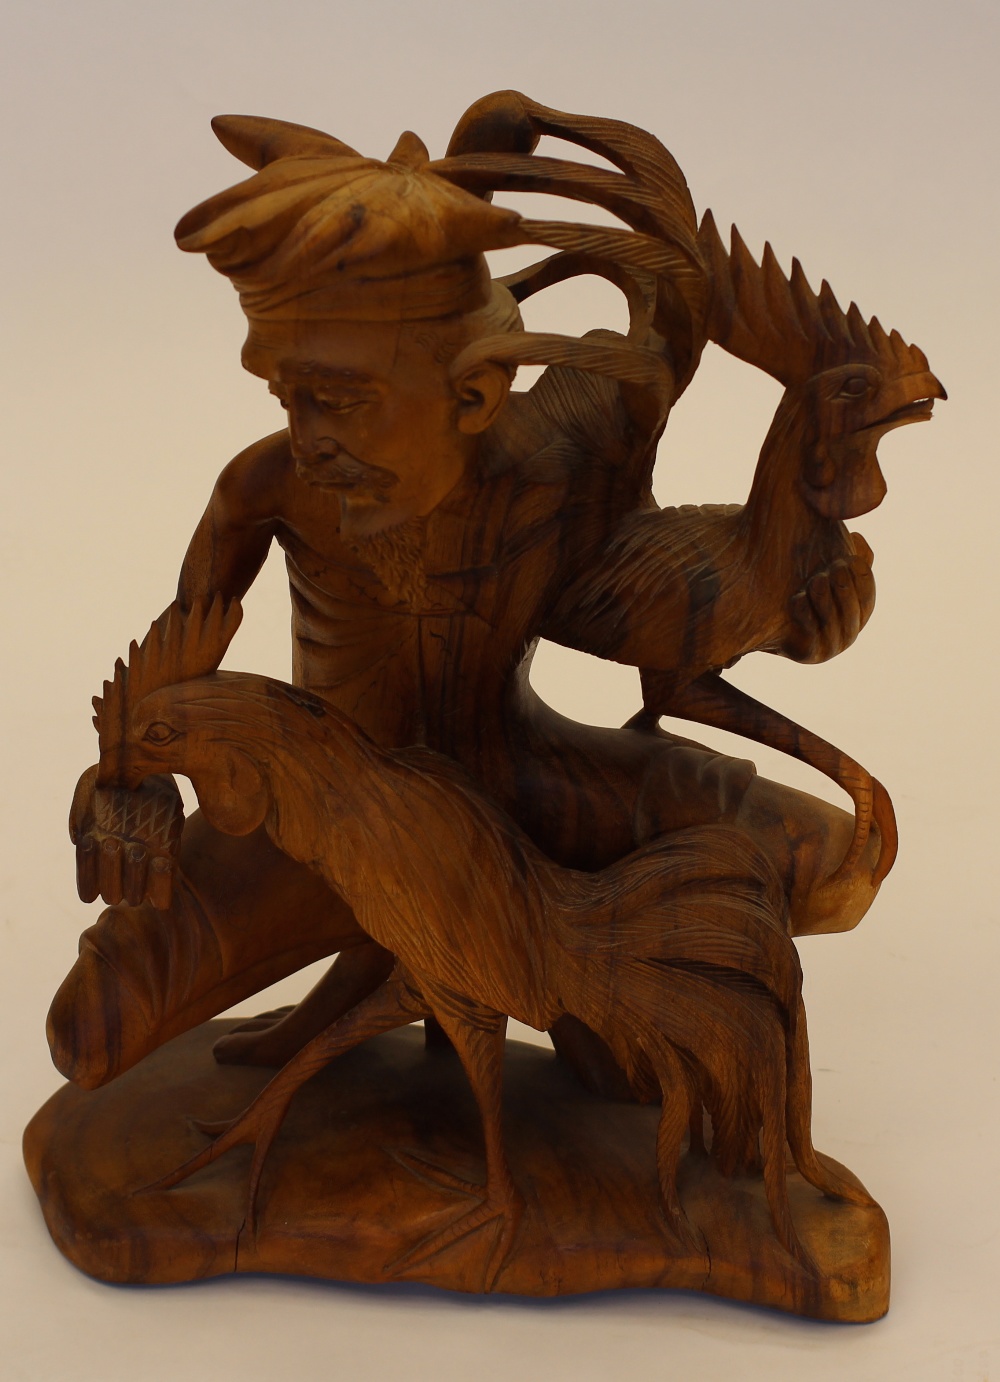 A large Balinese carved wood figure on Man with 2 large birds